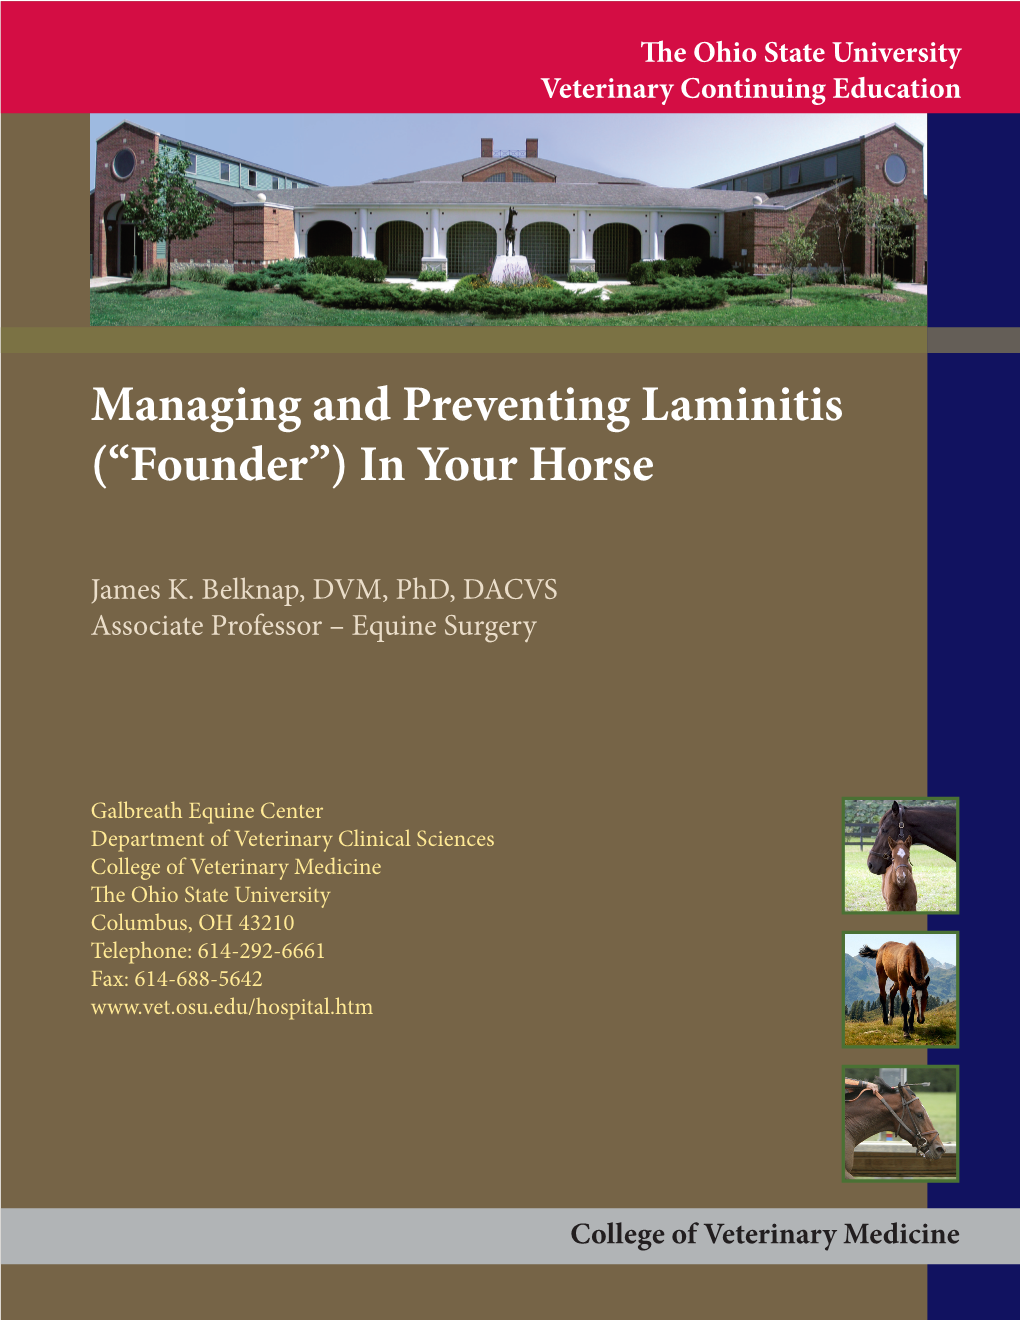 Managing and Preventing Laminitis (“Founder”) in Your Horse